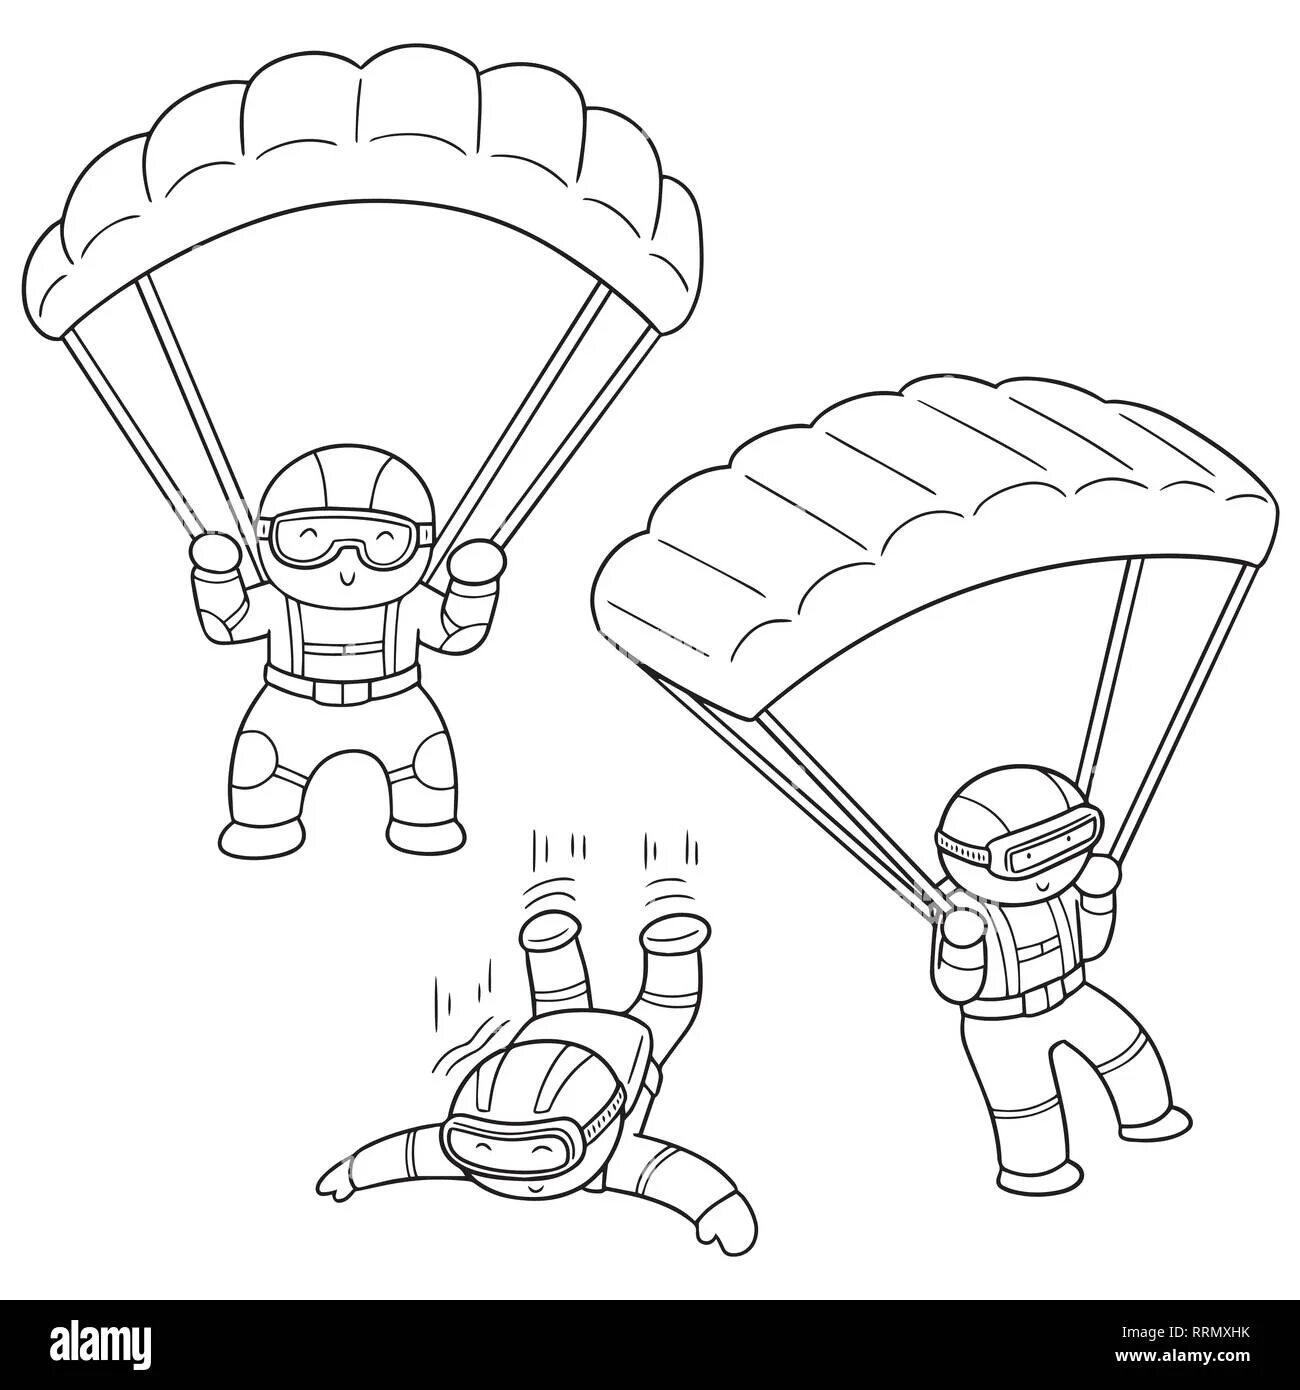 Adorable paratrooper coloring page for kids